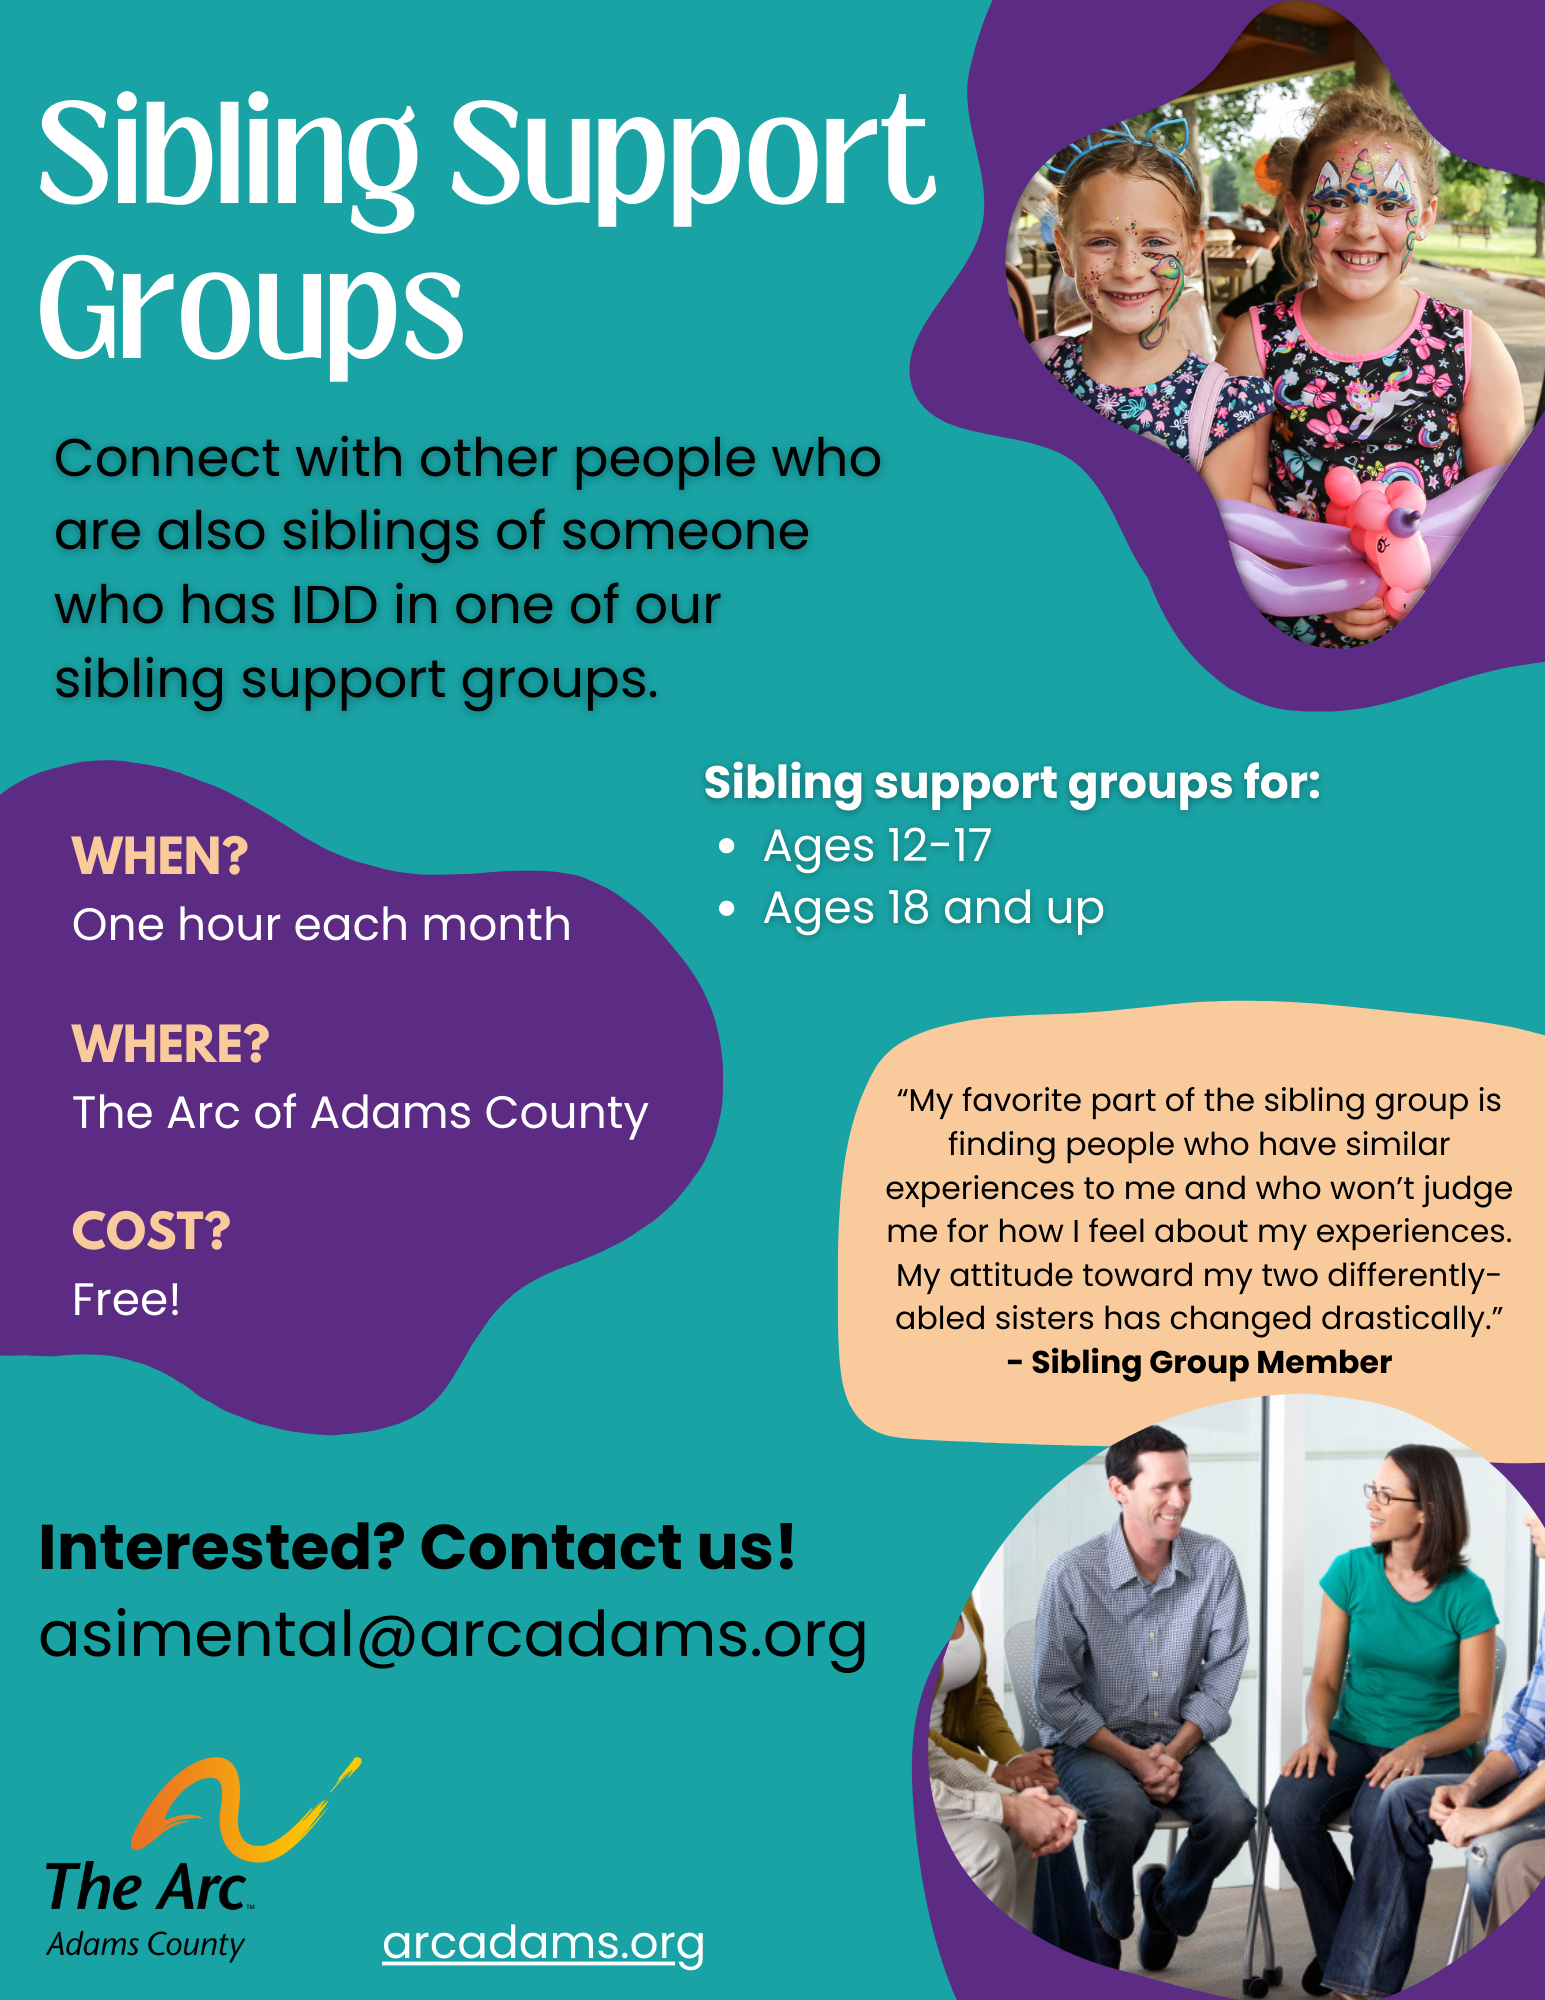 Sibling Support Group Flyer - more info at arcadams.org